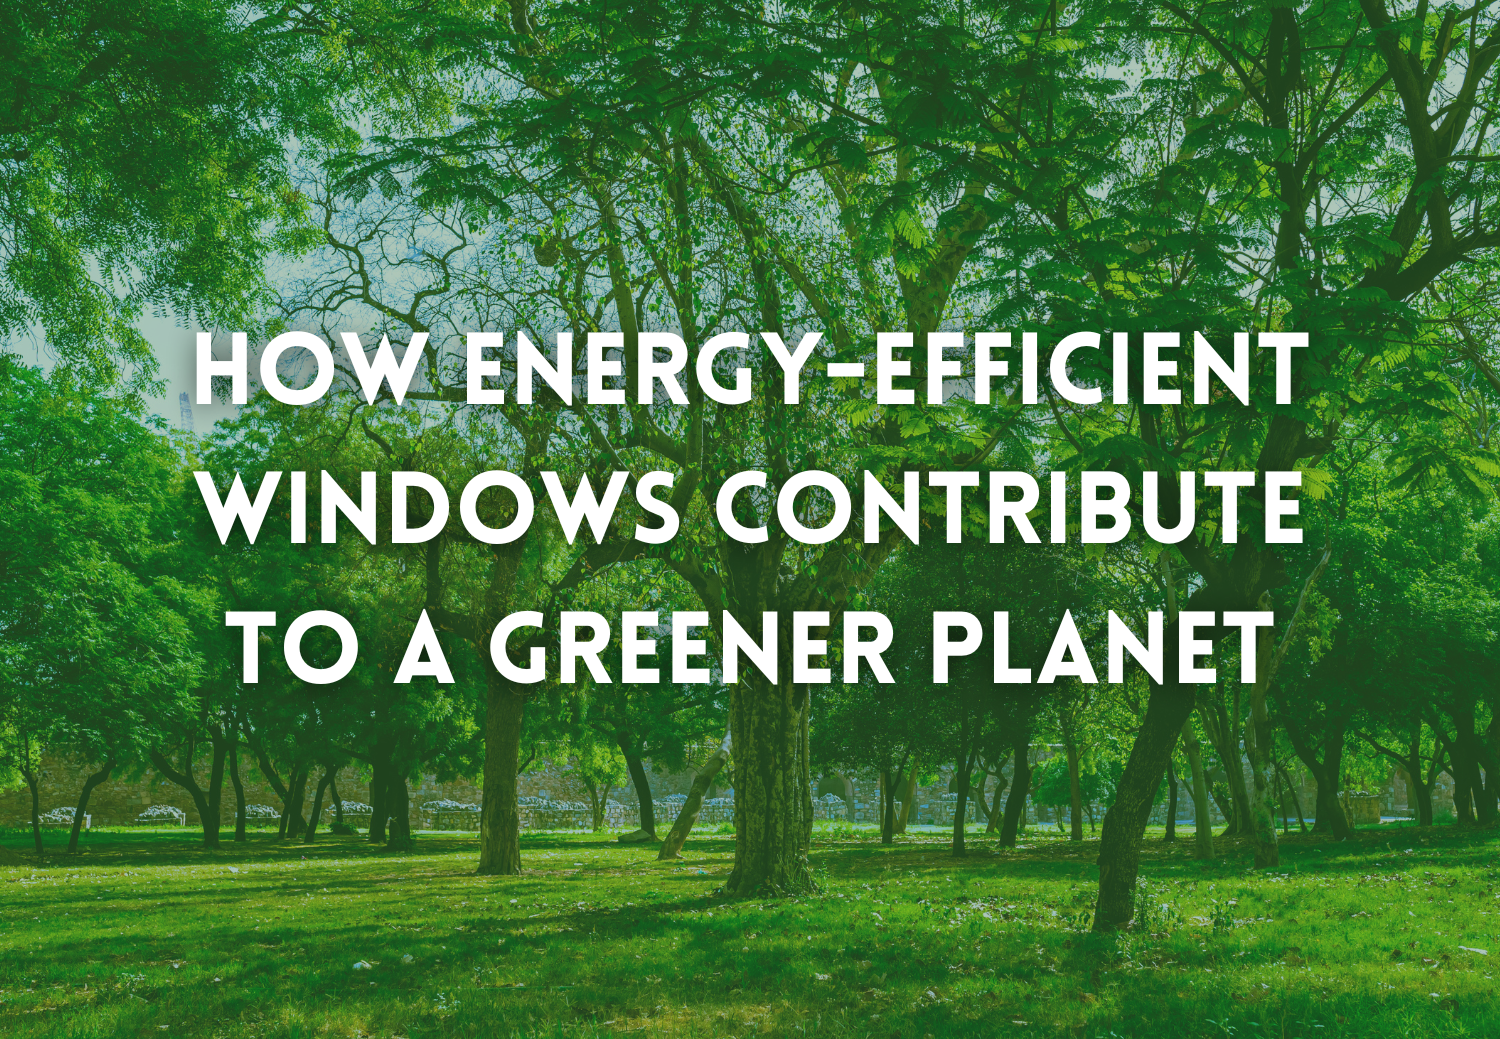 How Energy-Efficient Windows Contribute to a Greener Planet